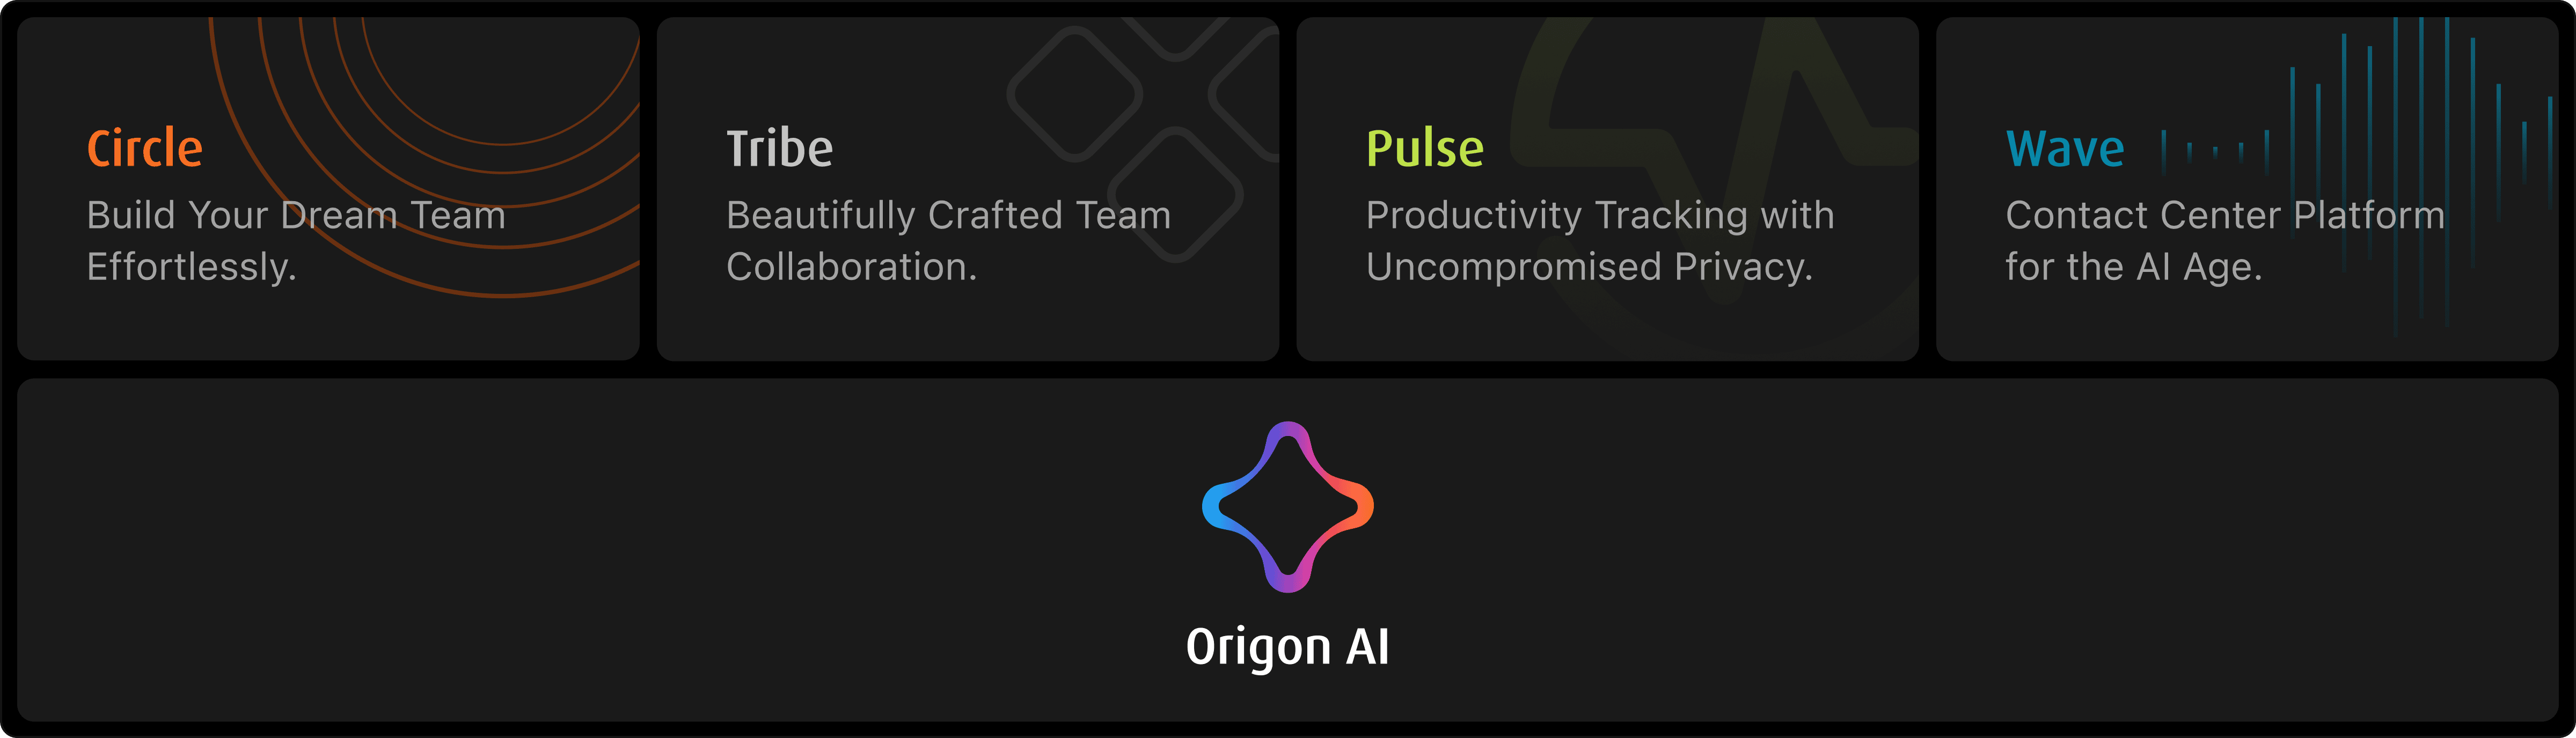 Diagram illustrating how Origon AI forms the foundation of Samespace's four main products: Circle, Tribe, Pulse, and Wave, each with a unique function and design but unified by the underlying AI technology.